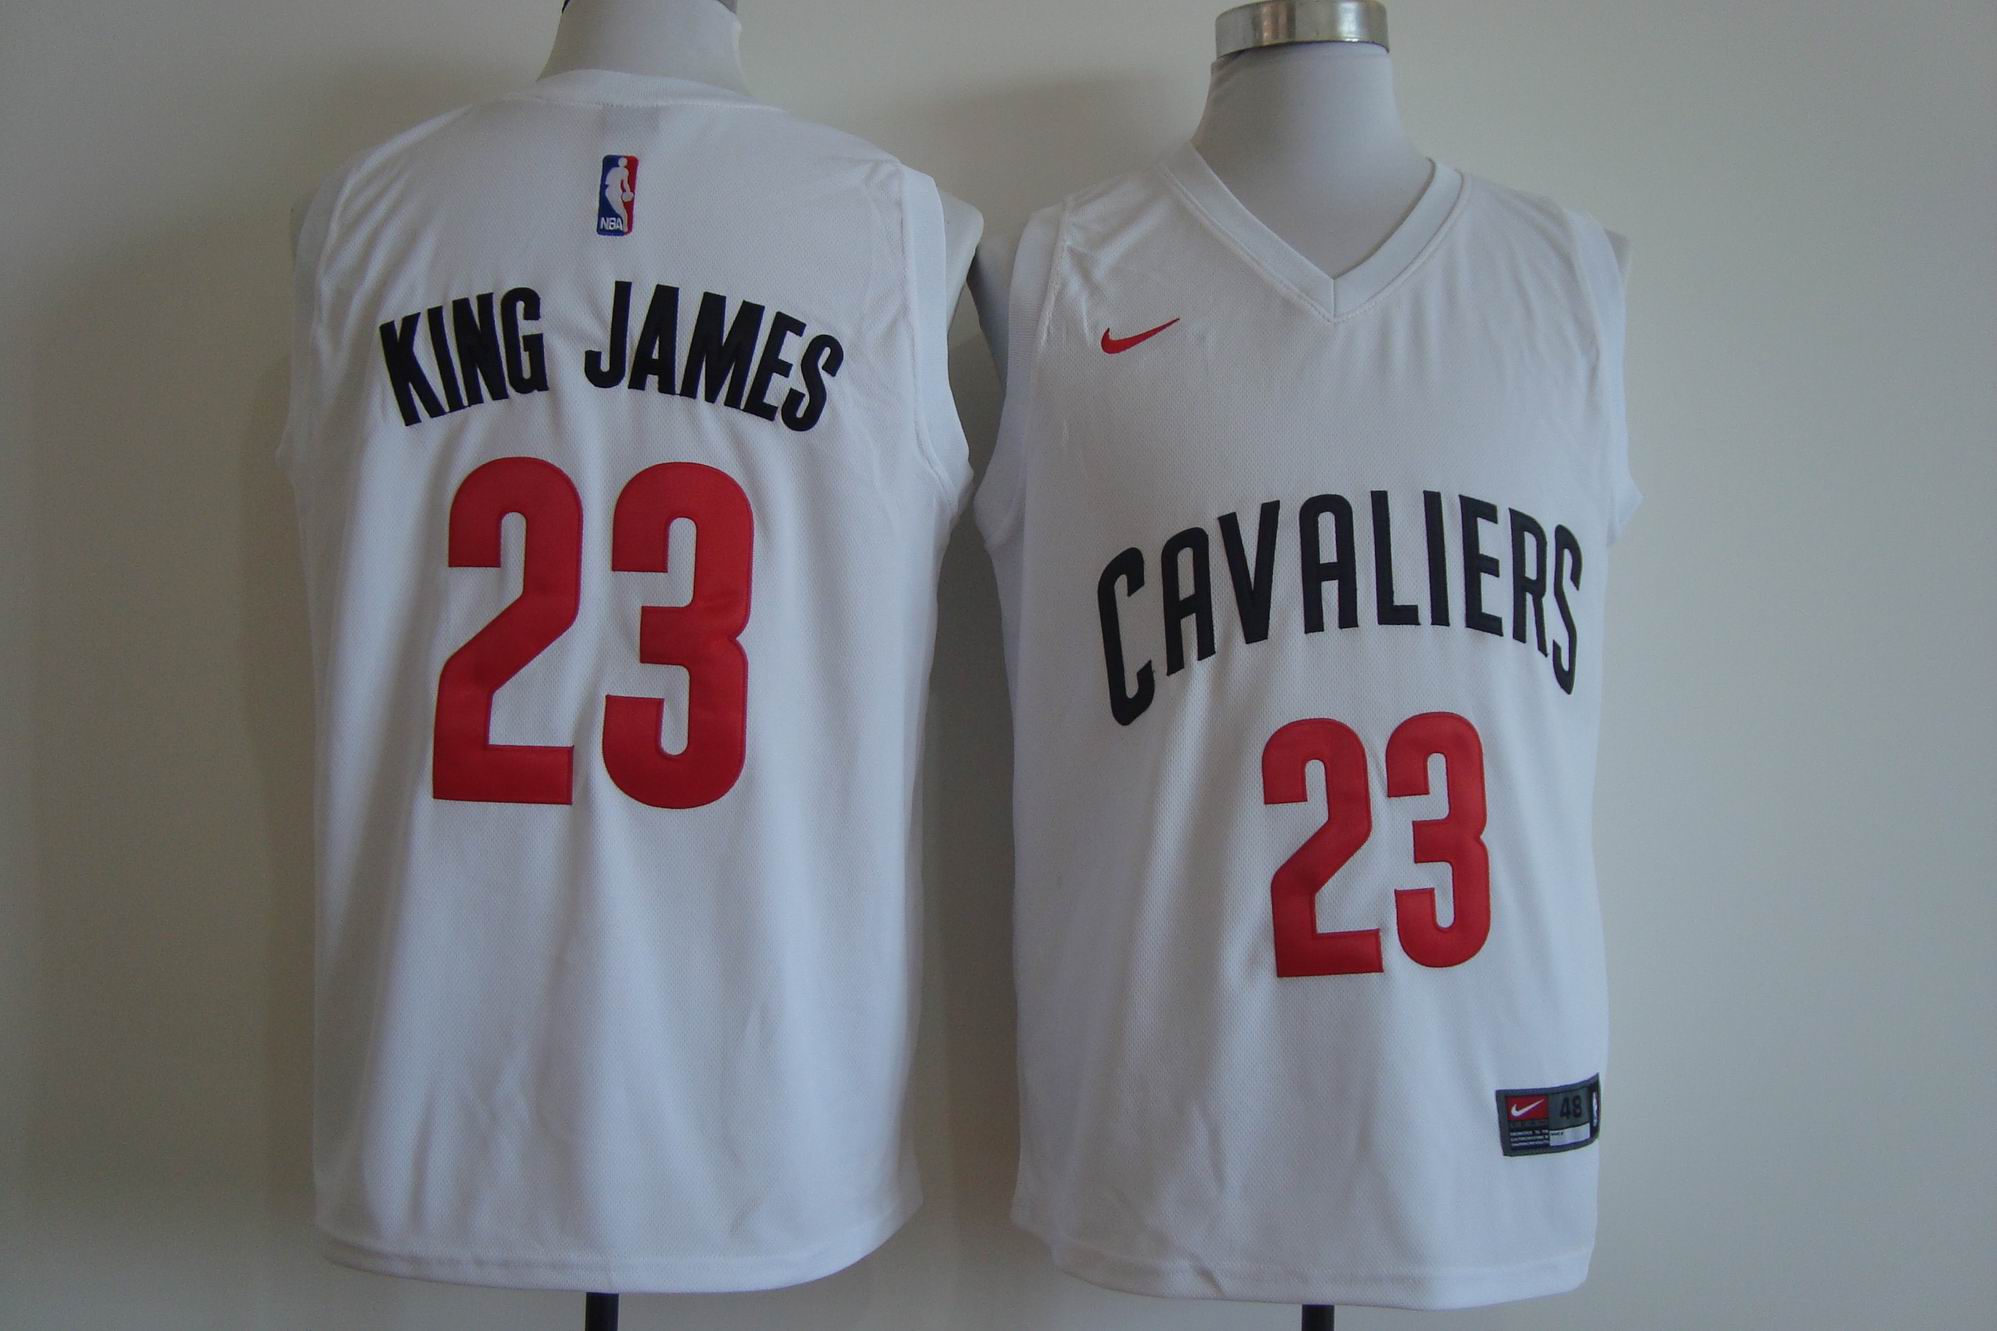 Men's Nike Cleveland Cavaliers #23 LeBron James White King James Stitched NBA Jersey